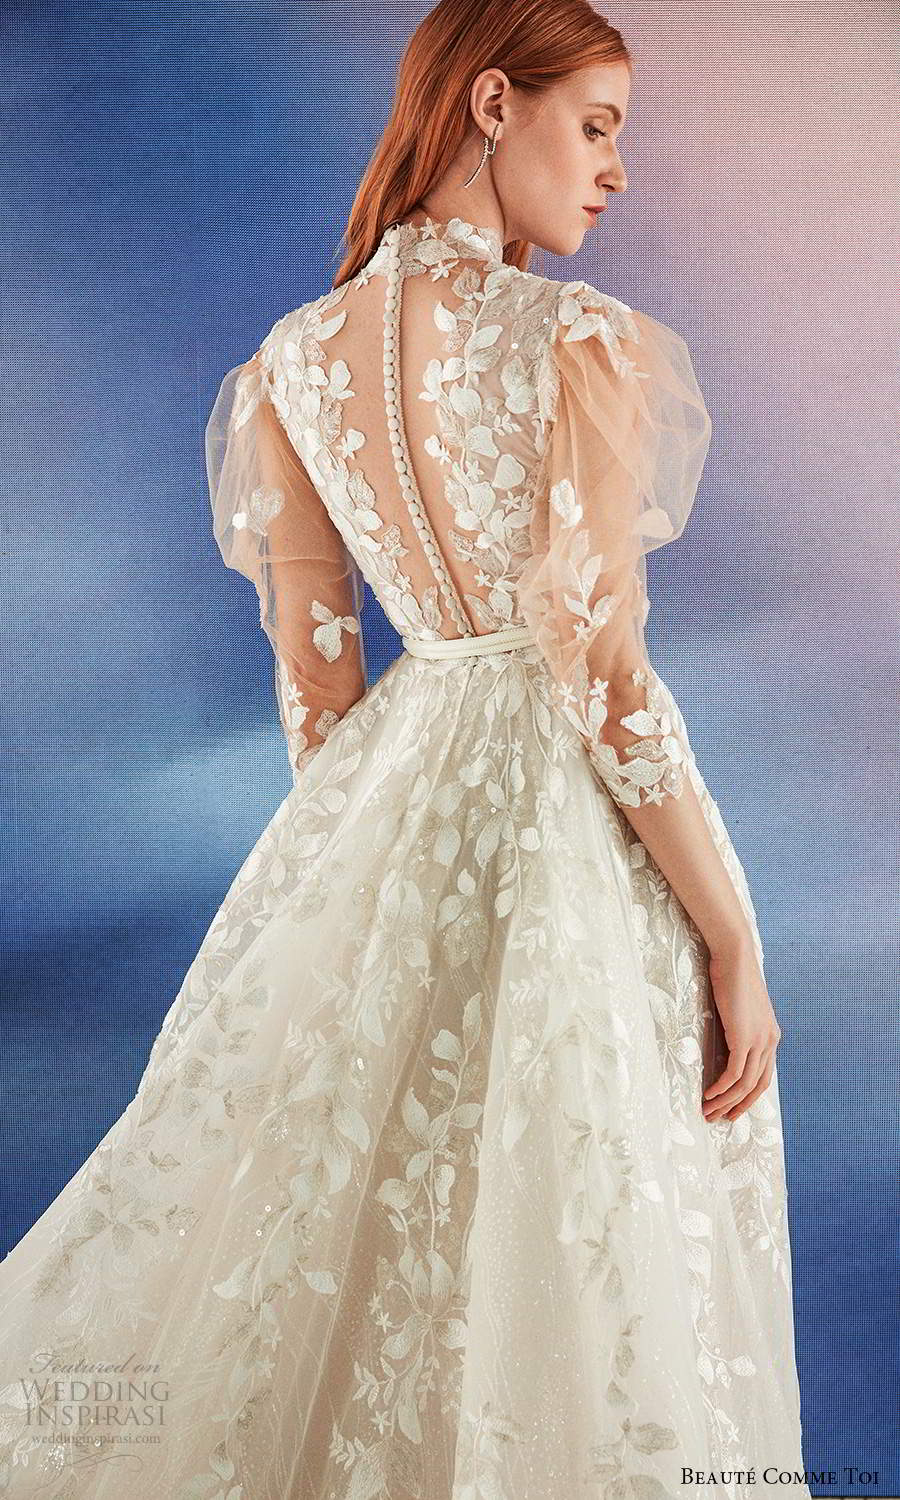 beaute comme toi fall 2021 bridal illusion puff sleeves high neckline cutout bodice fully embellished a line ball gown wedding dress chapel train (1) zbv